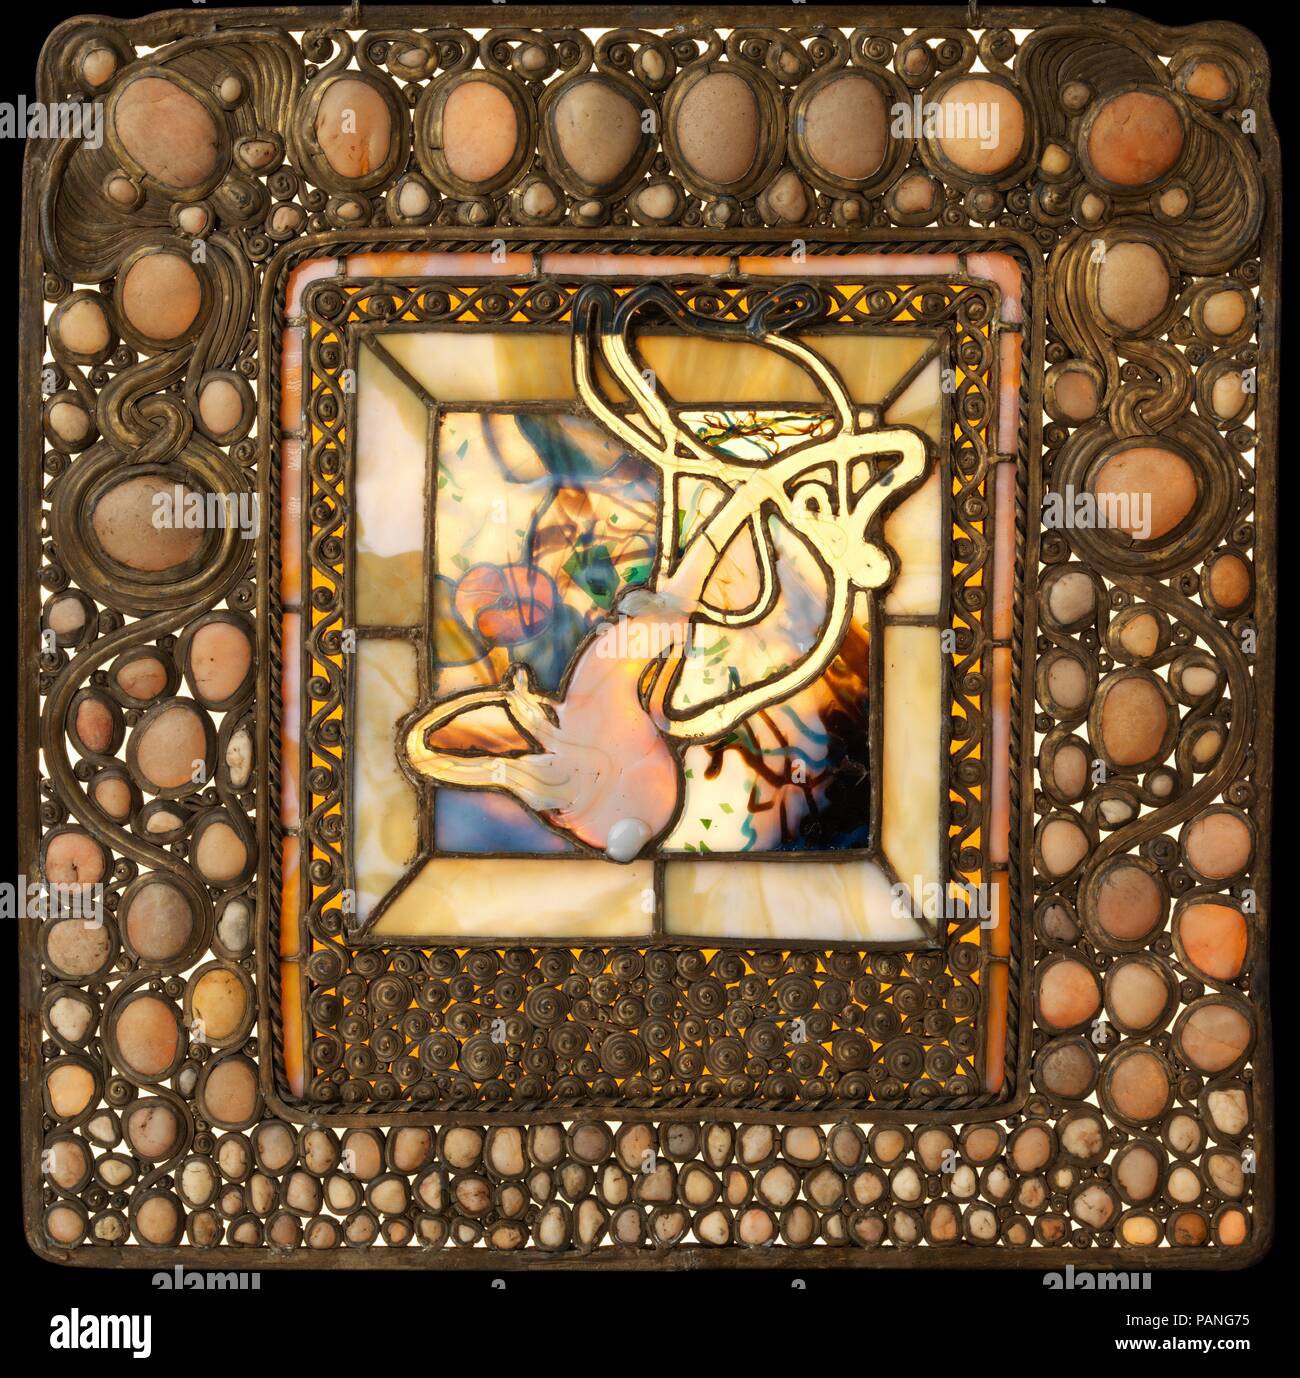 Squash Window with Pebbles. Artist: Louis Comfort Tiffany (American, New York 1848-1933 New York). Culture: American. Dimensions: 24 × 24 in. (61 × 61 cm). Date: 1885-90.  Louis Comfort Tiffany (1848-1933) was one of the most celebrated artists at the turn of the twentieth century. Throughout a career that spanned the 1870s through the 1920s, his work included painting and almost every decorative art medium. His travels abroad encouraged his interest in art from the Near and Far East, which informed his decorative work alongside those inspired by nature. Simultaneously, he embodied modernity,  Stock Photo